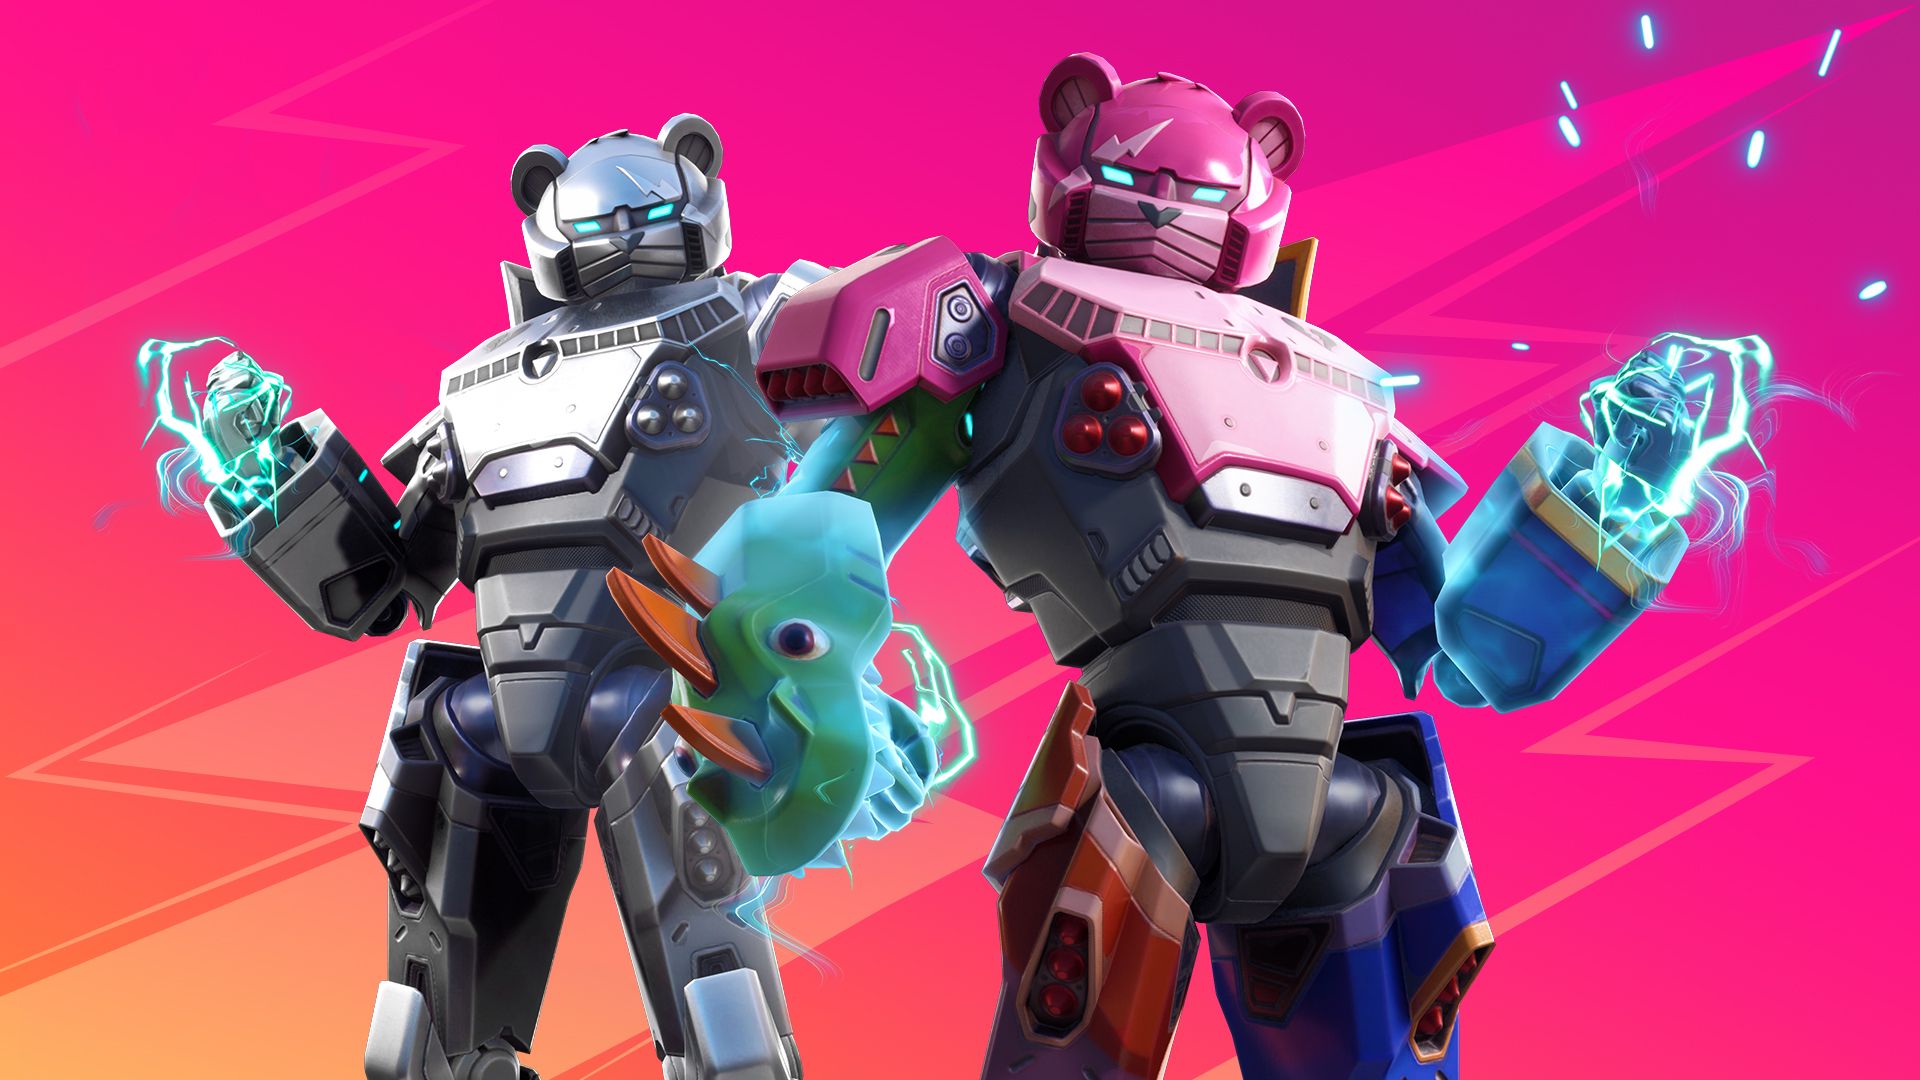 fnbr.co - #Fortnite News Update: Mecha Team Leader Some assembly required. Grab the Mecha Team Leader Outfit now!